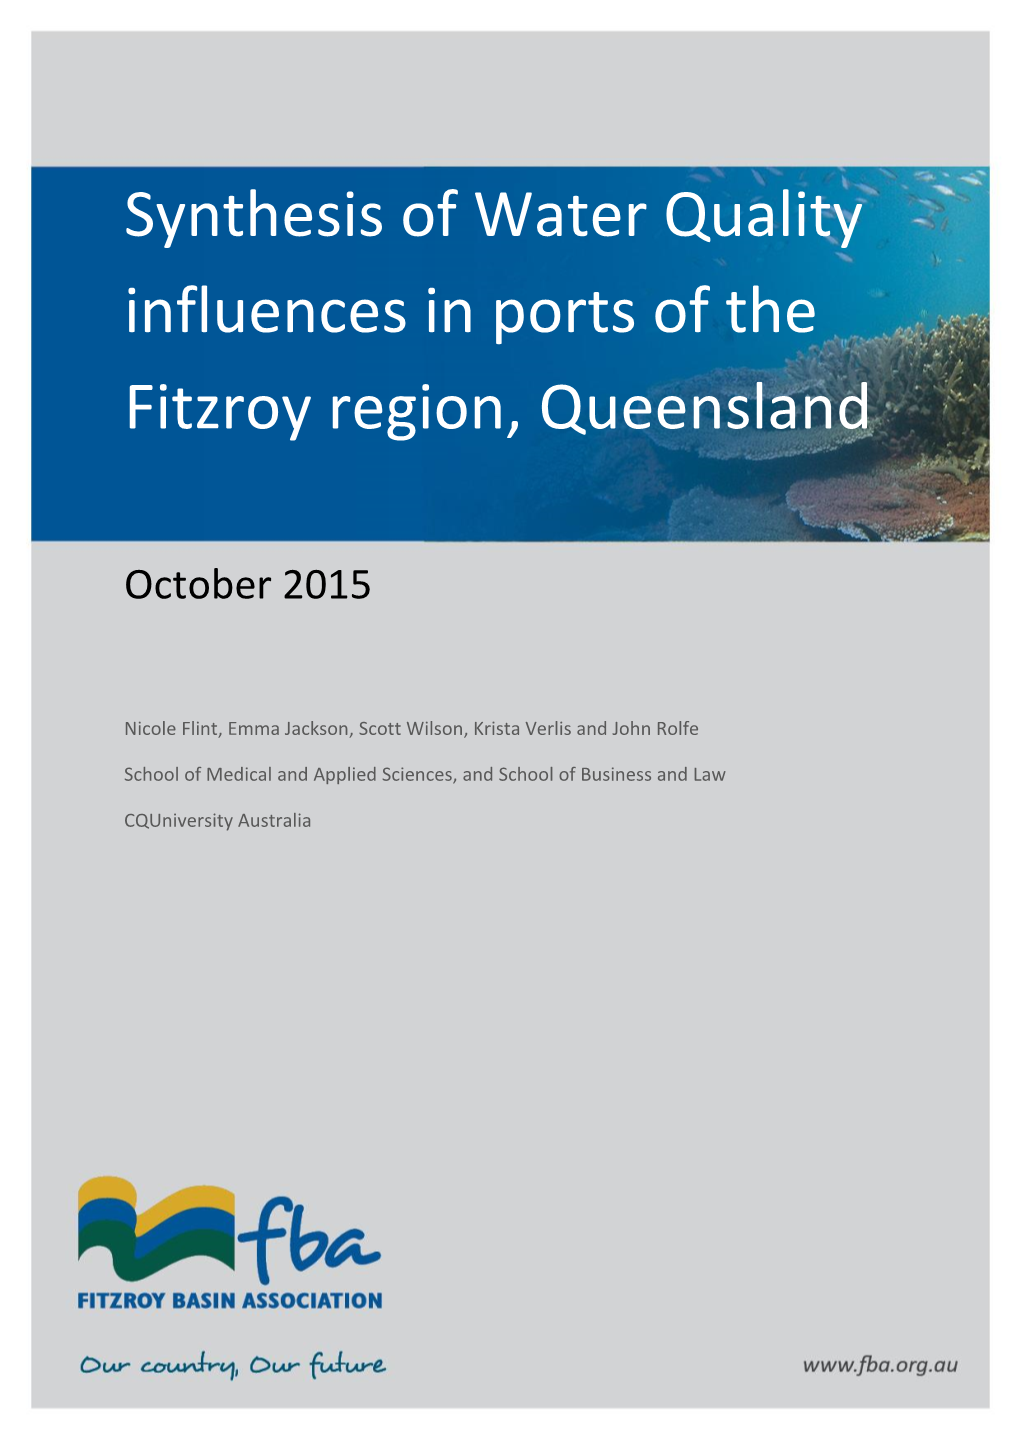 Synthesis of Water Quality Influences in Ports of the Fitzroy Region, Queensland